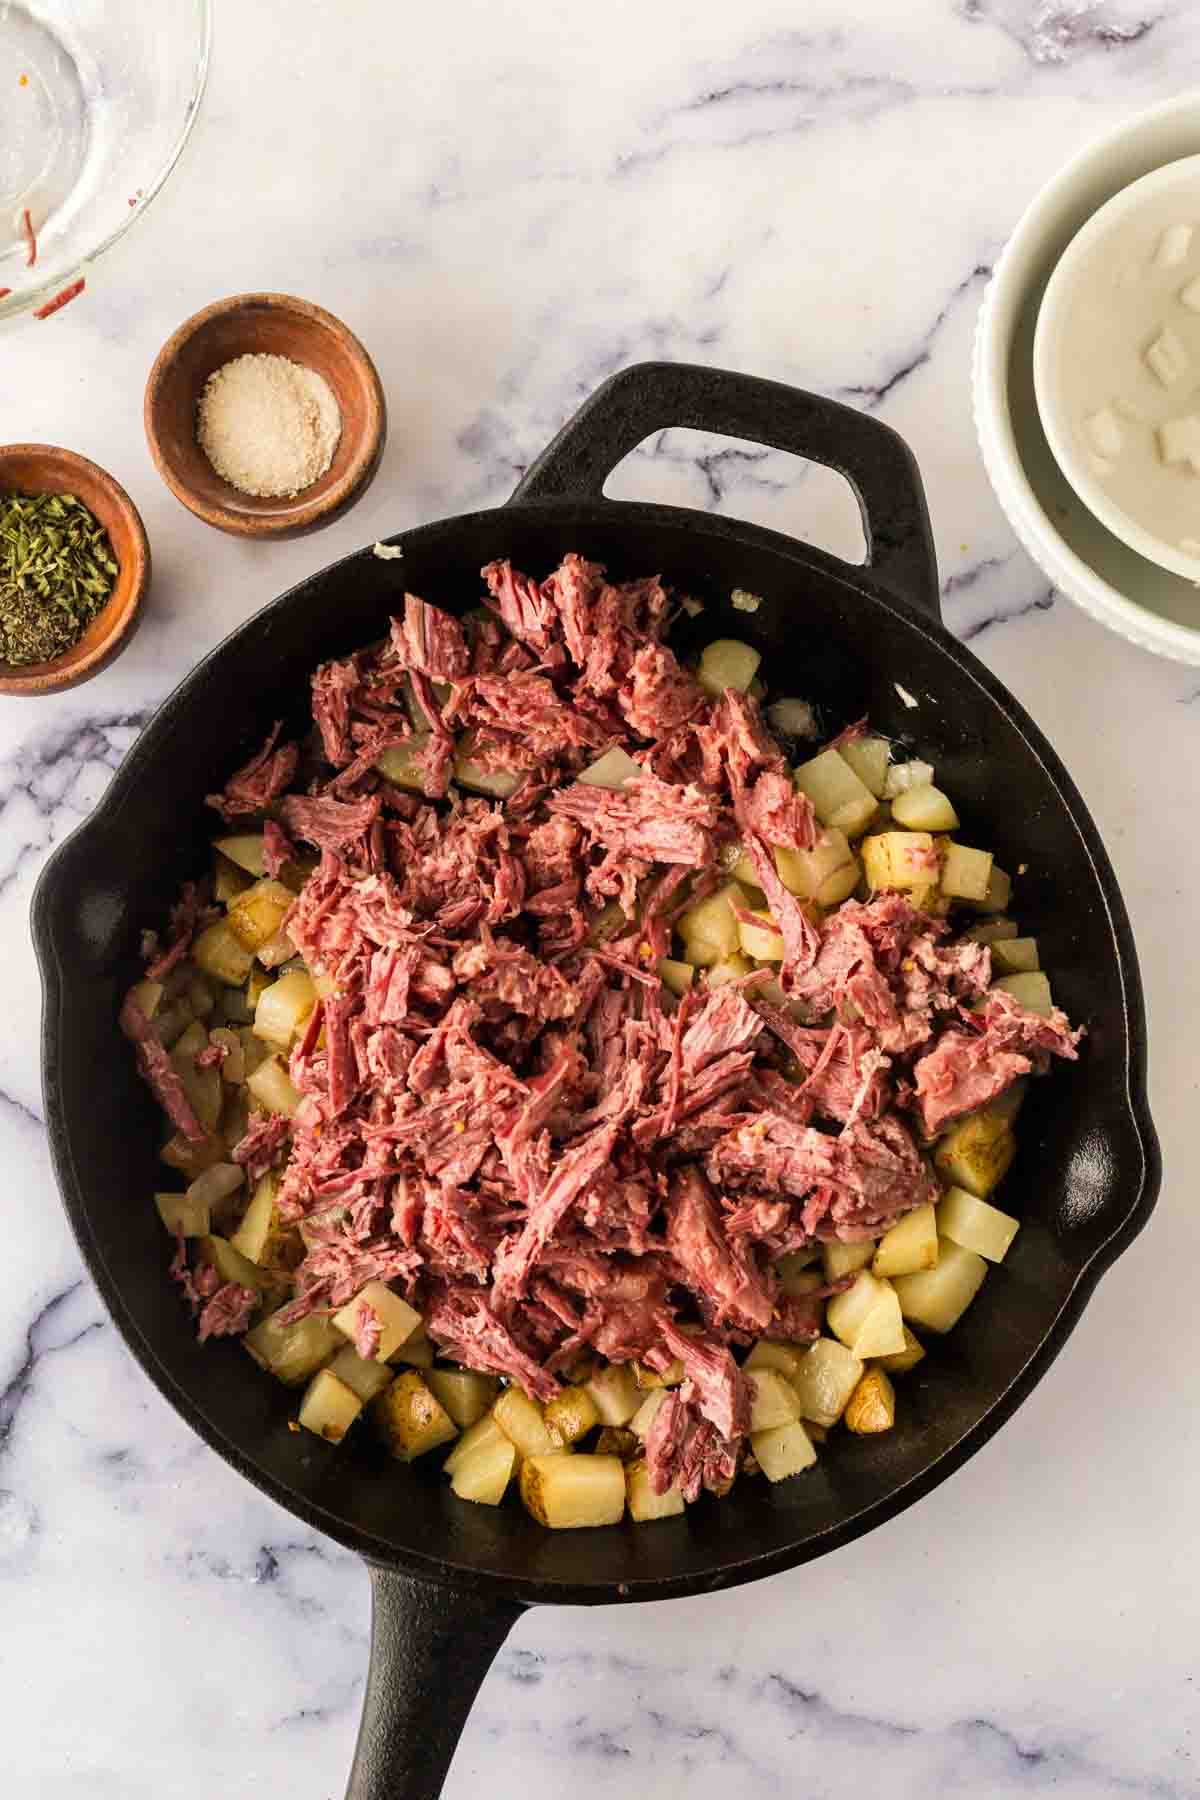 Shredded beef added to the skillet of corned beef hash.